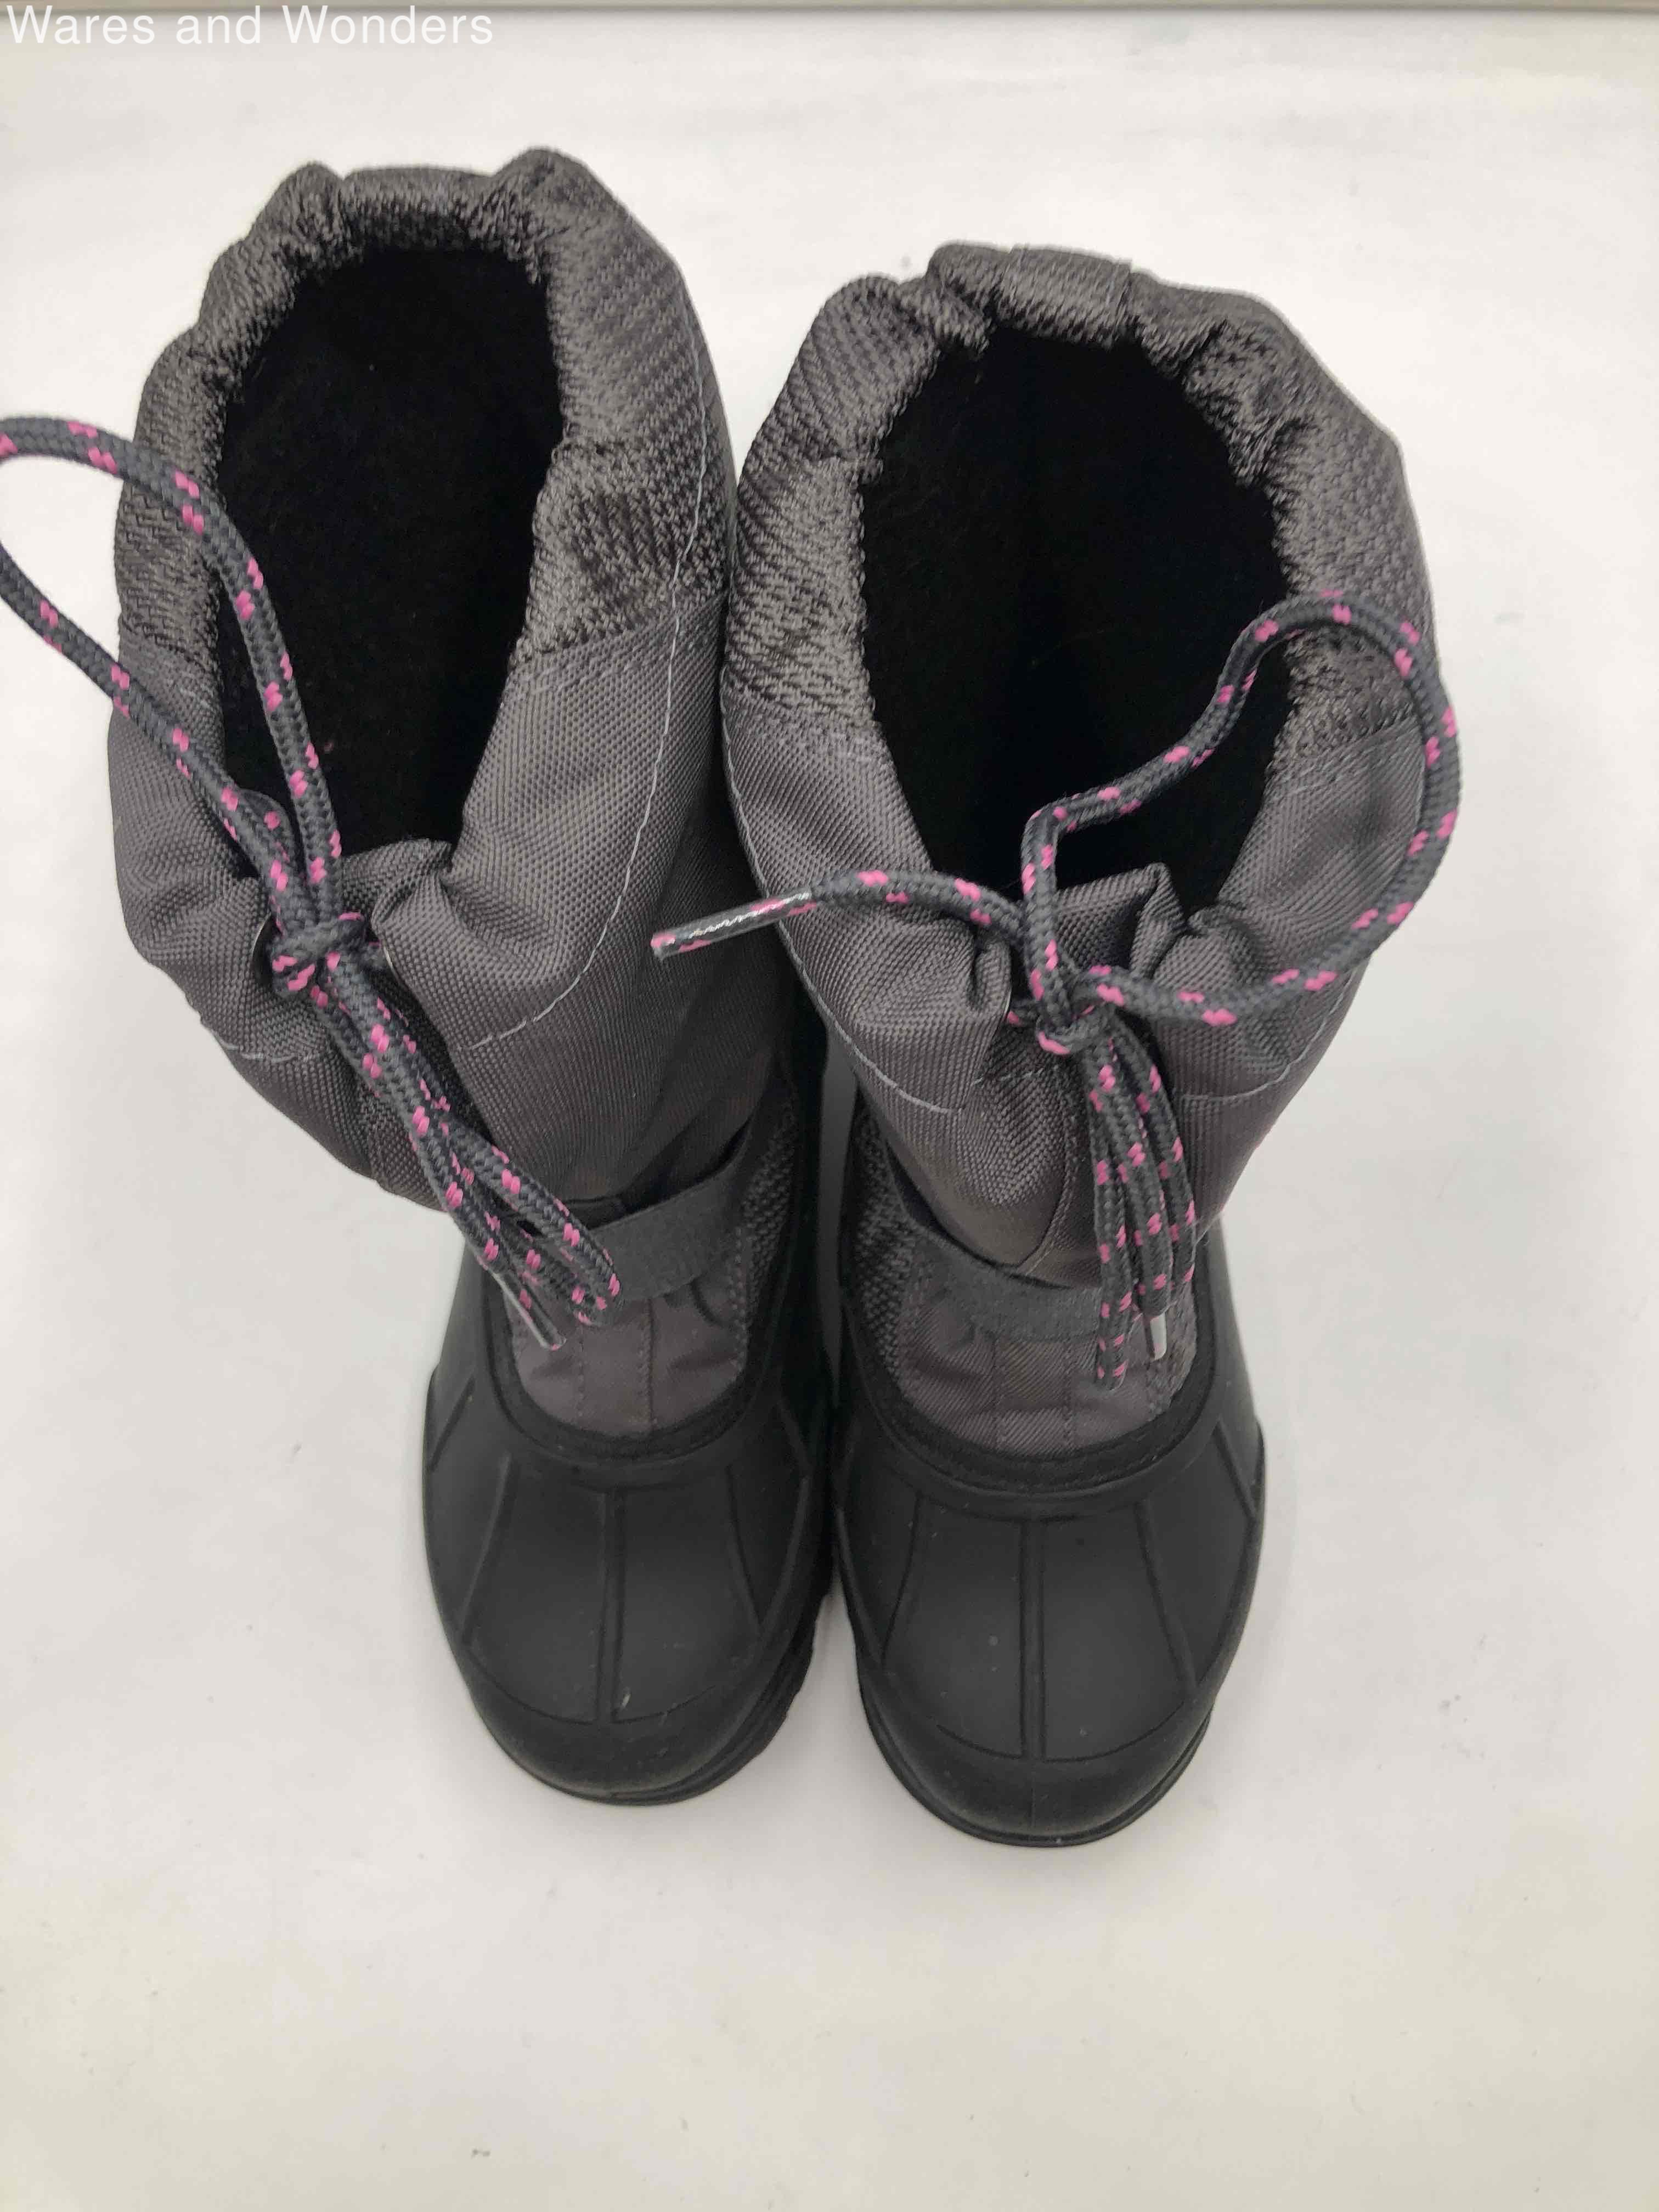 Artic Cat Extreme Weather Boots Kids Sizes 1,2,3 or 5 Insulated Waterproof B199 